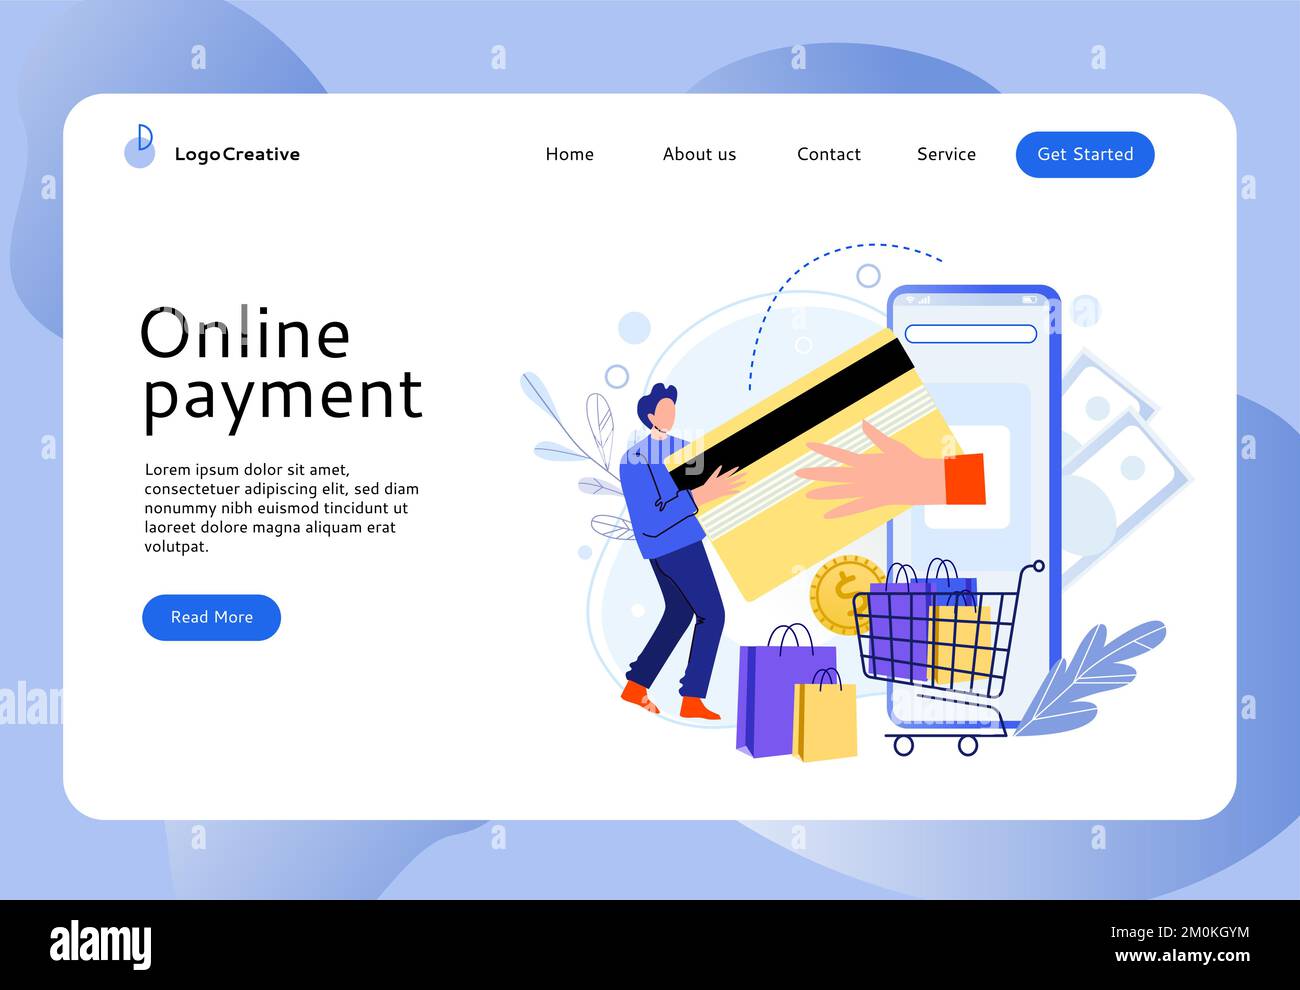 Online shopping landing page. Man doing payment with credit card online via smartphone. Male character buying Stock Vector